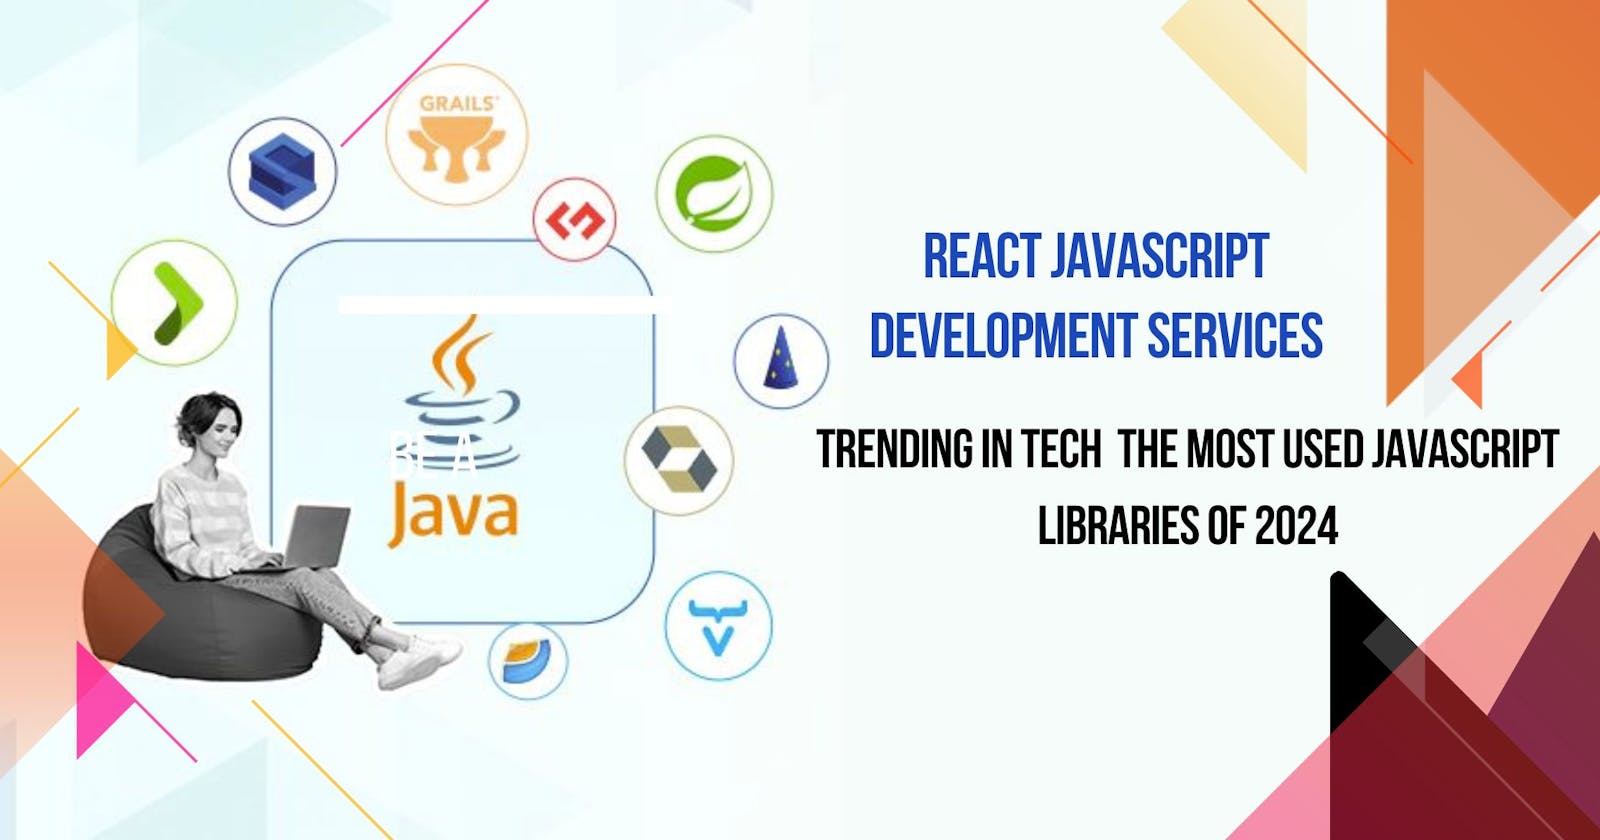 Trending in Tech: The Most Used JavaScript Libraries of 2024